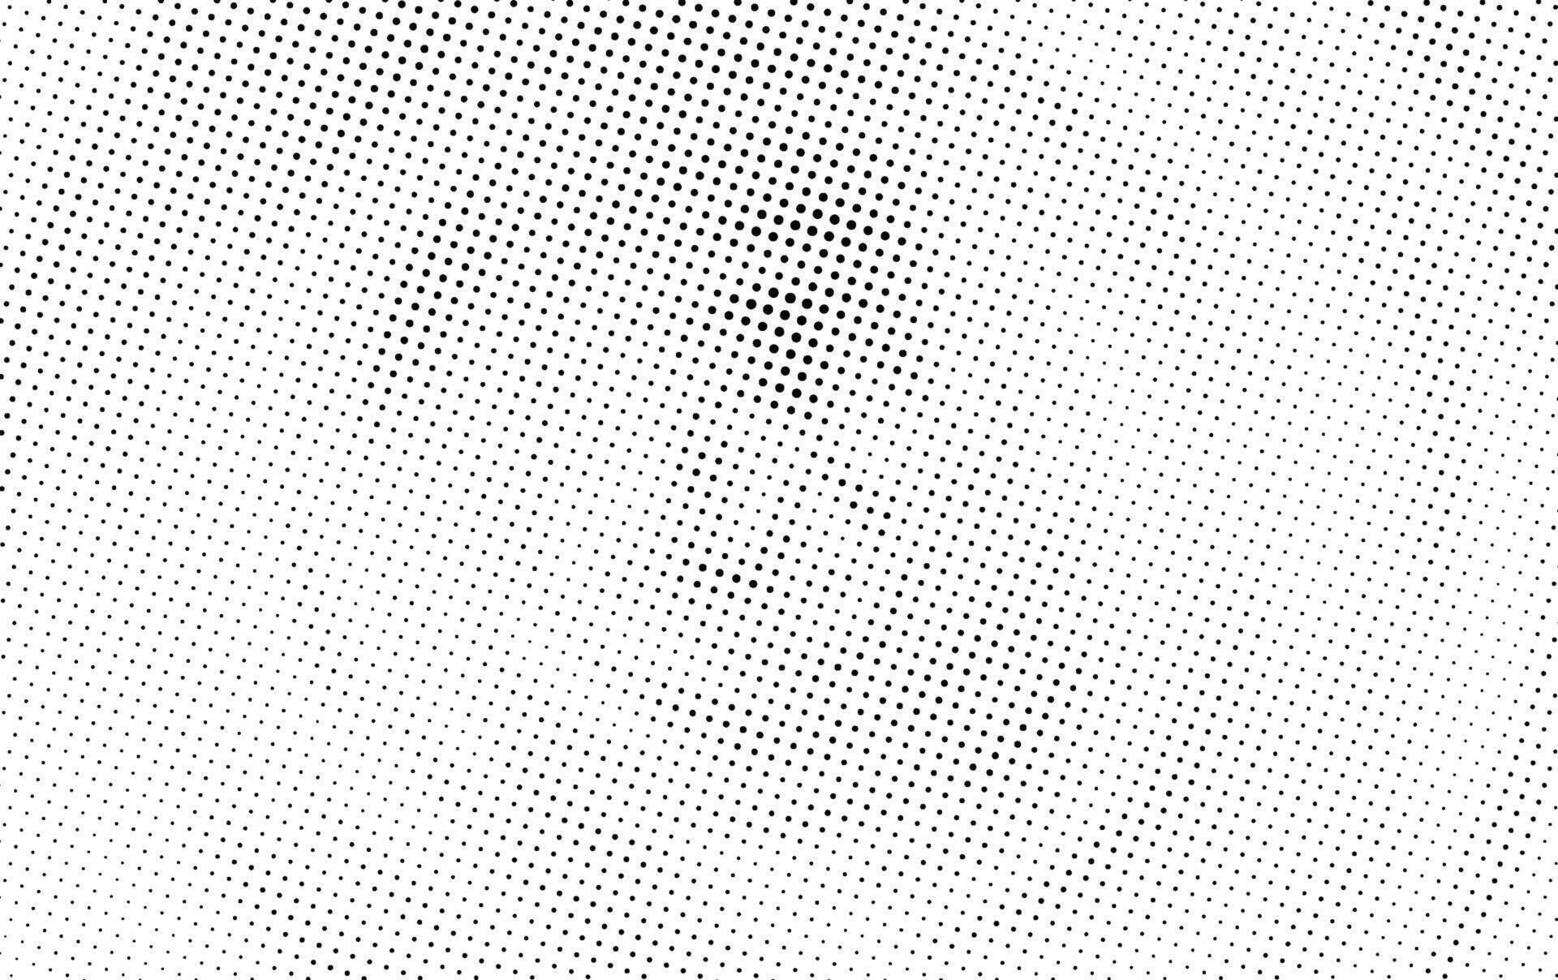 halftone dot pattern background vector, a set of four different abstract dots patterns,   a black and white drawing gradient dots effect, grunge effect with round circle dote texture vector